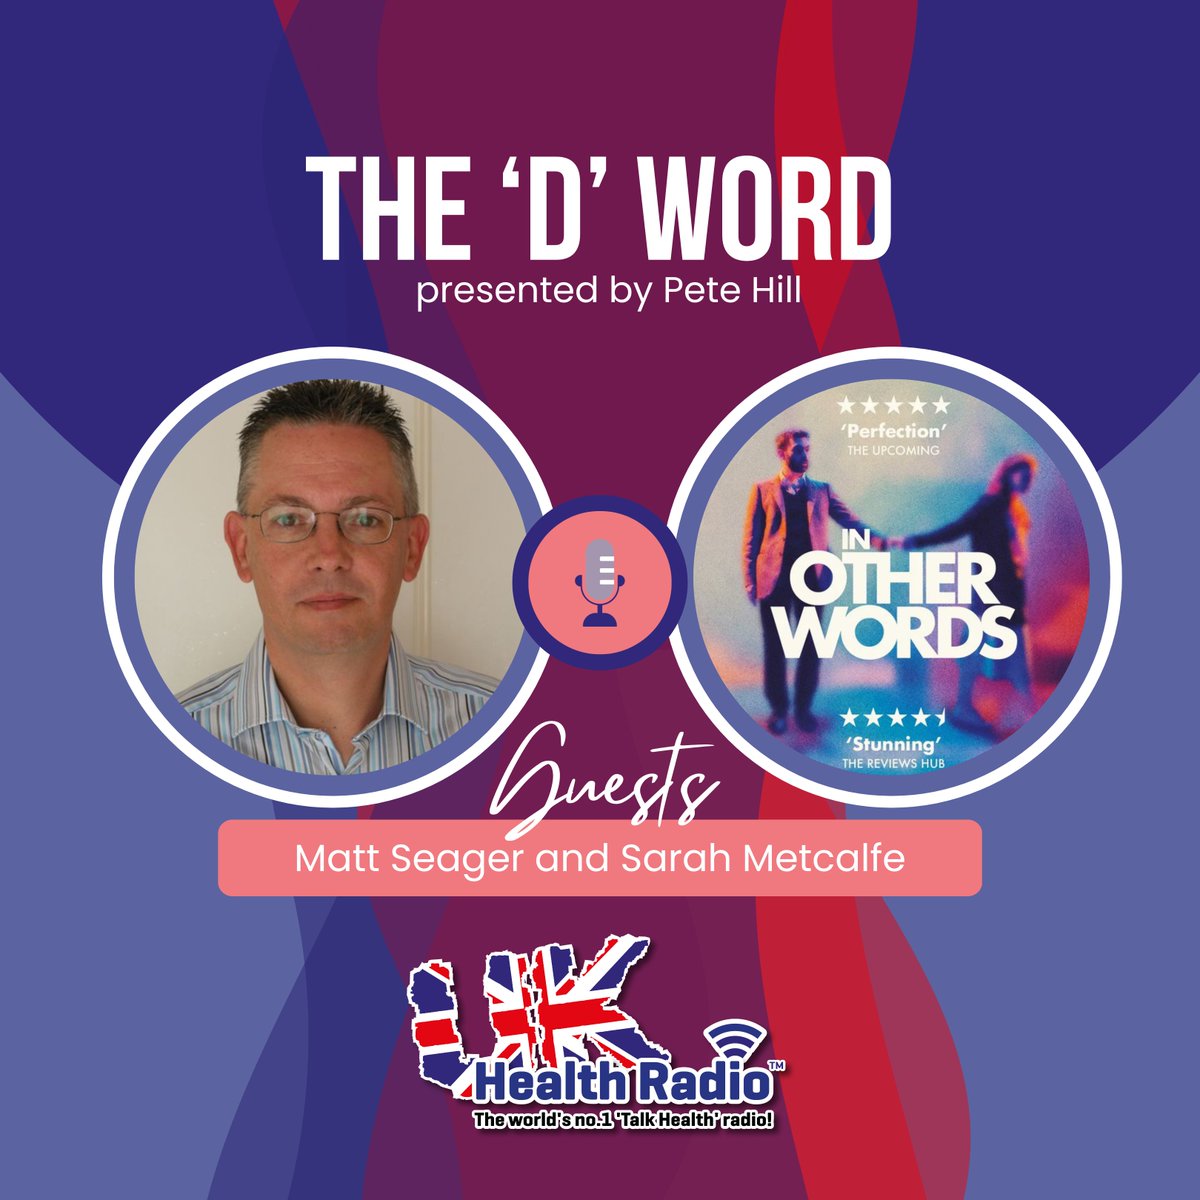 The ‘D’ Word with Pete Hill @RadioTdw on @ukhealthradio - This week Pete chats to writer/performer Matt Seager @Mattseager4 and Sarah Metcalfe MD of Music For Dementia @MusicforDemUK about the play In Other Words @arcolatheatre. 👉🏼 🎧 ukhealthradio.com #wellbeingpodcast